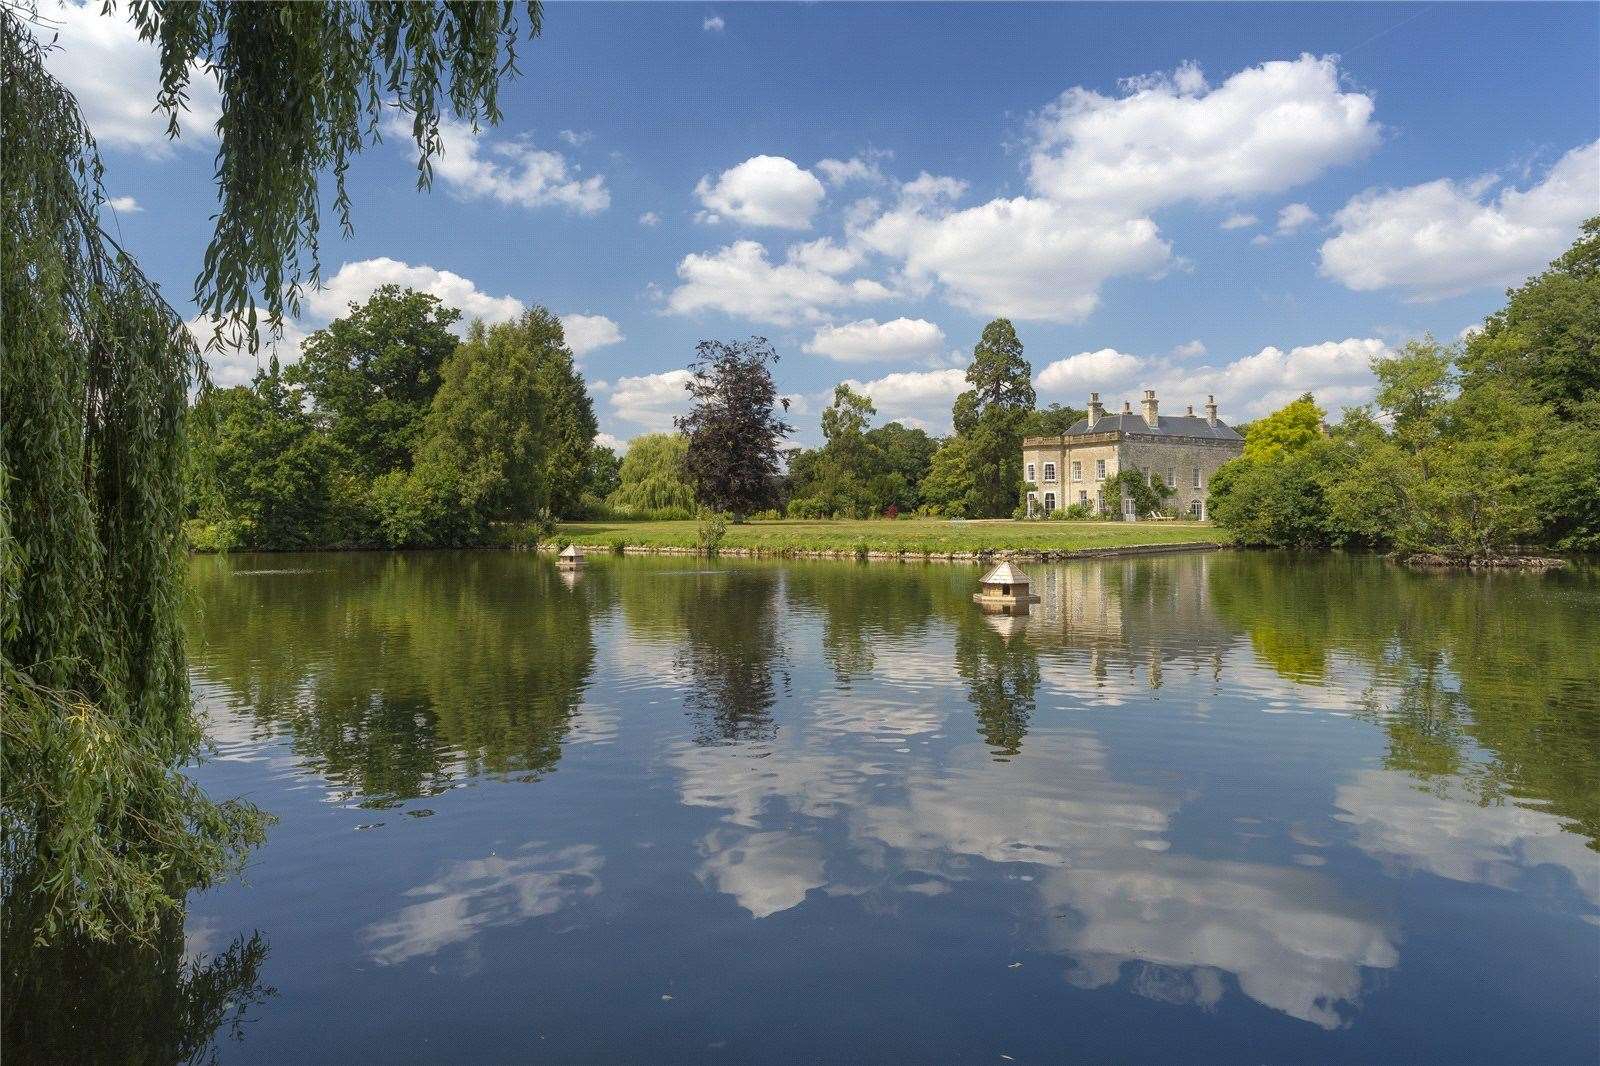 Hunton Court, a three-storey Grade II-listed country house in Hunton, near Maidstone, is the dearest property on Kent's market, according to Zoopla